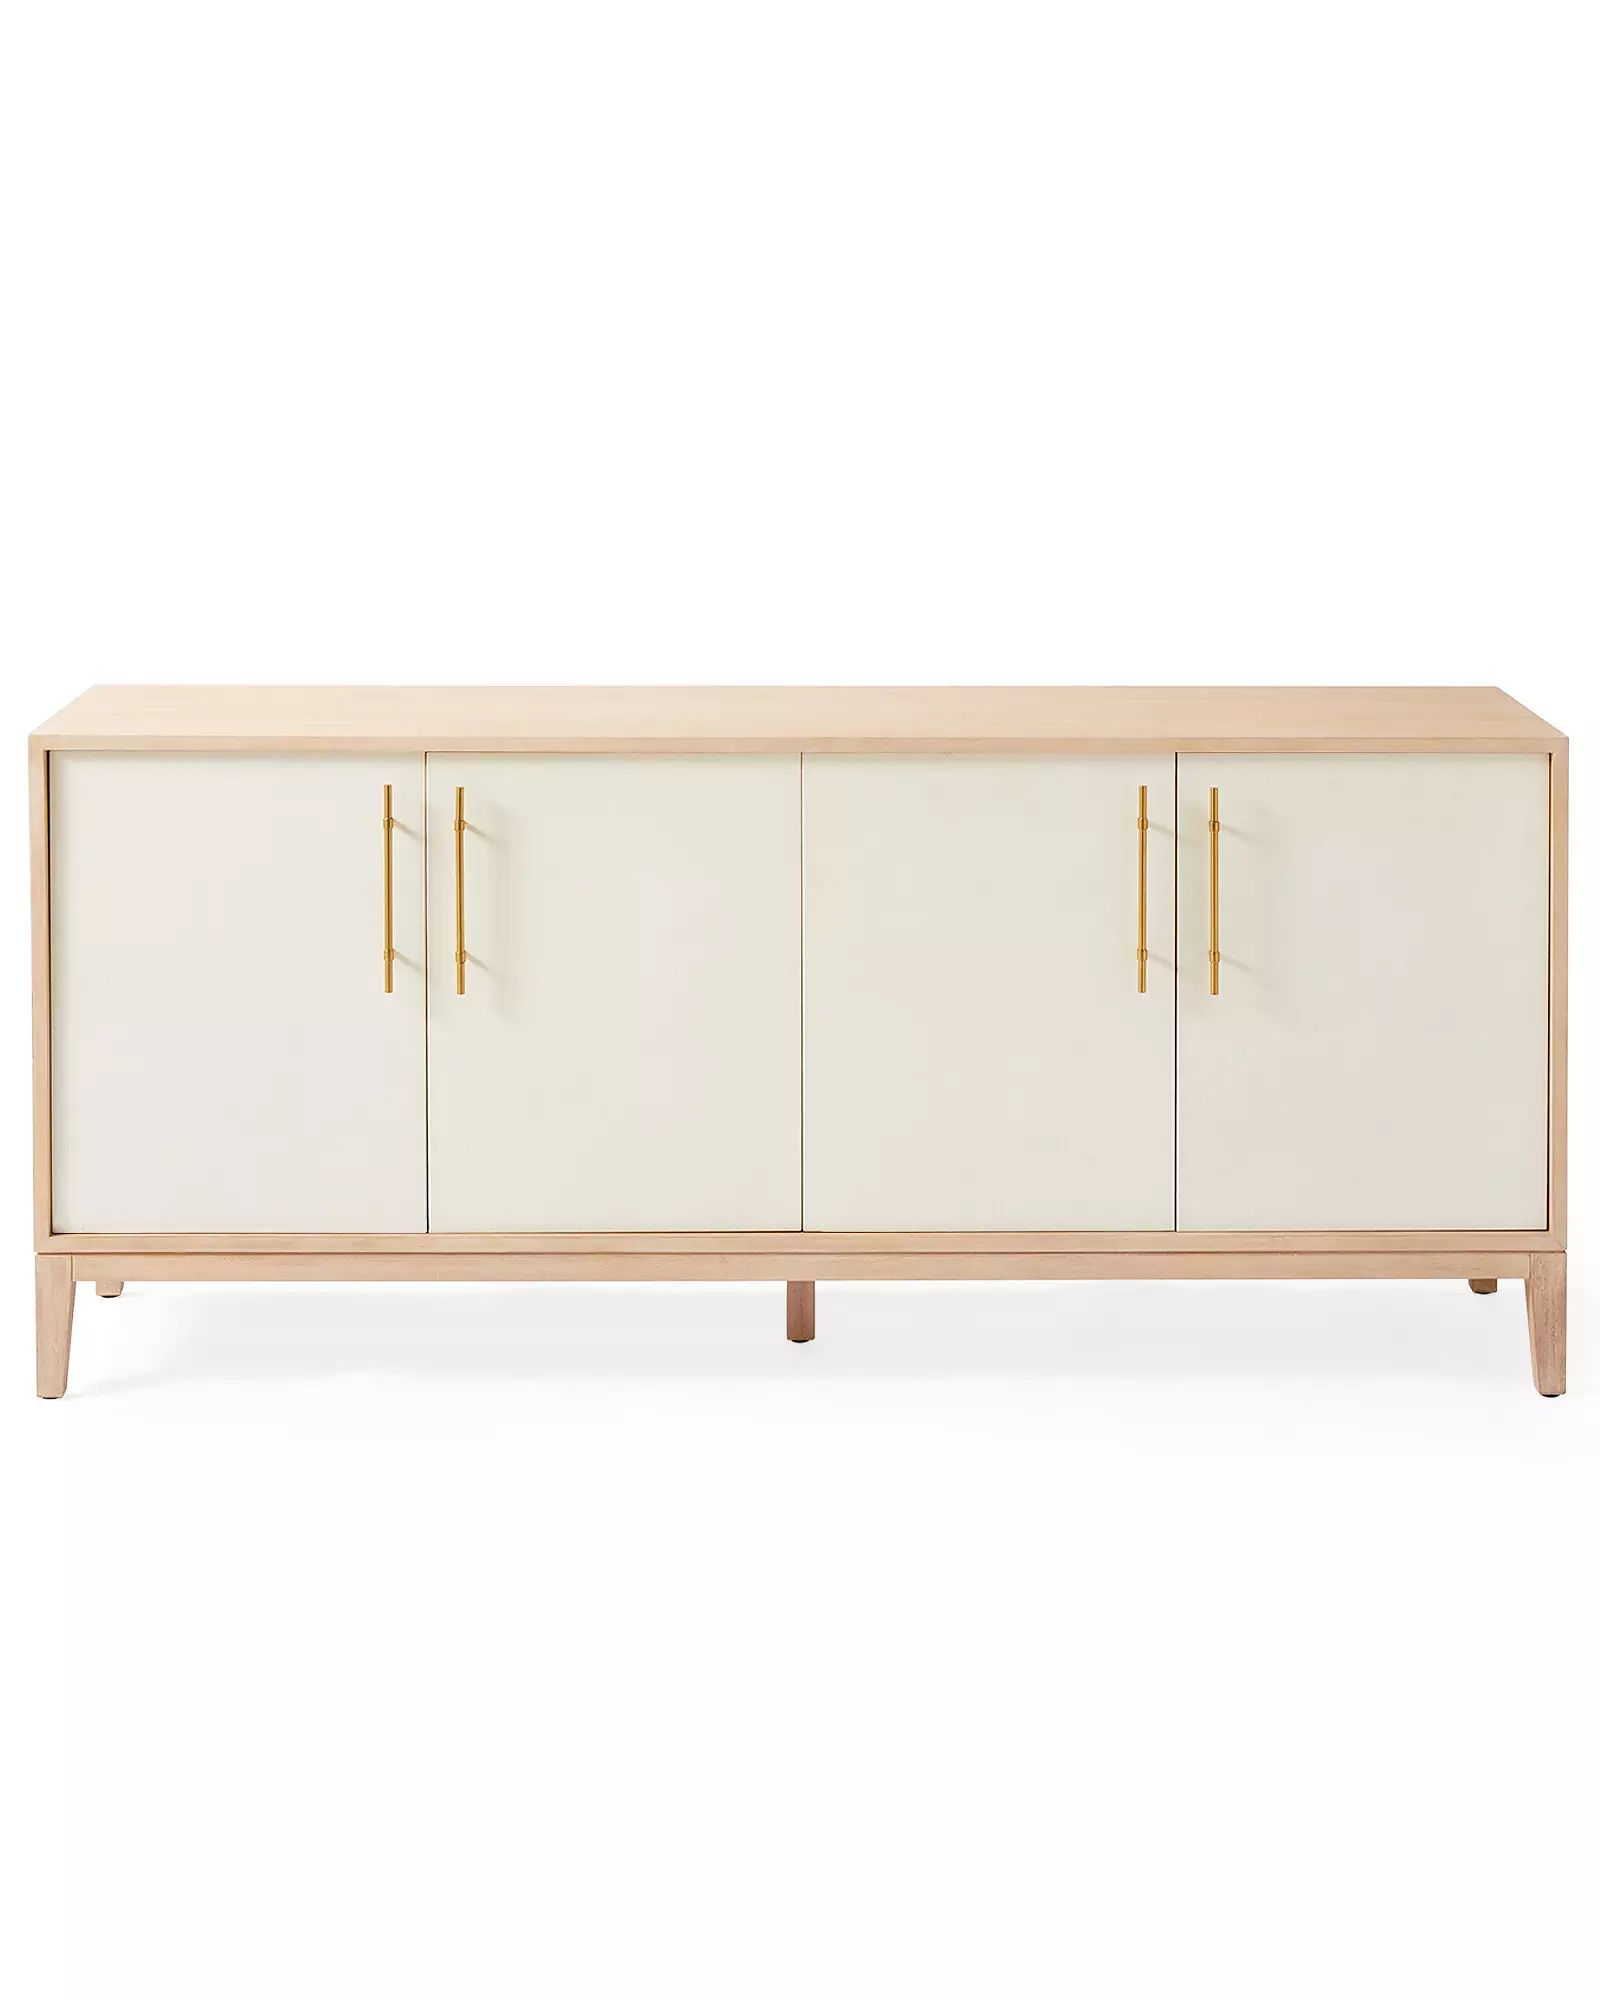 Wooster Console | Serena and Lily